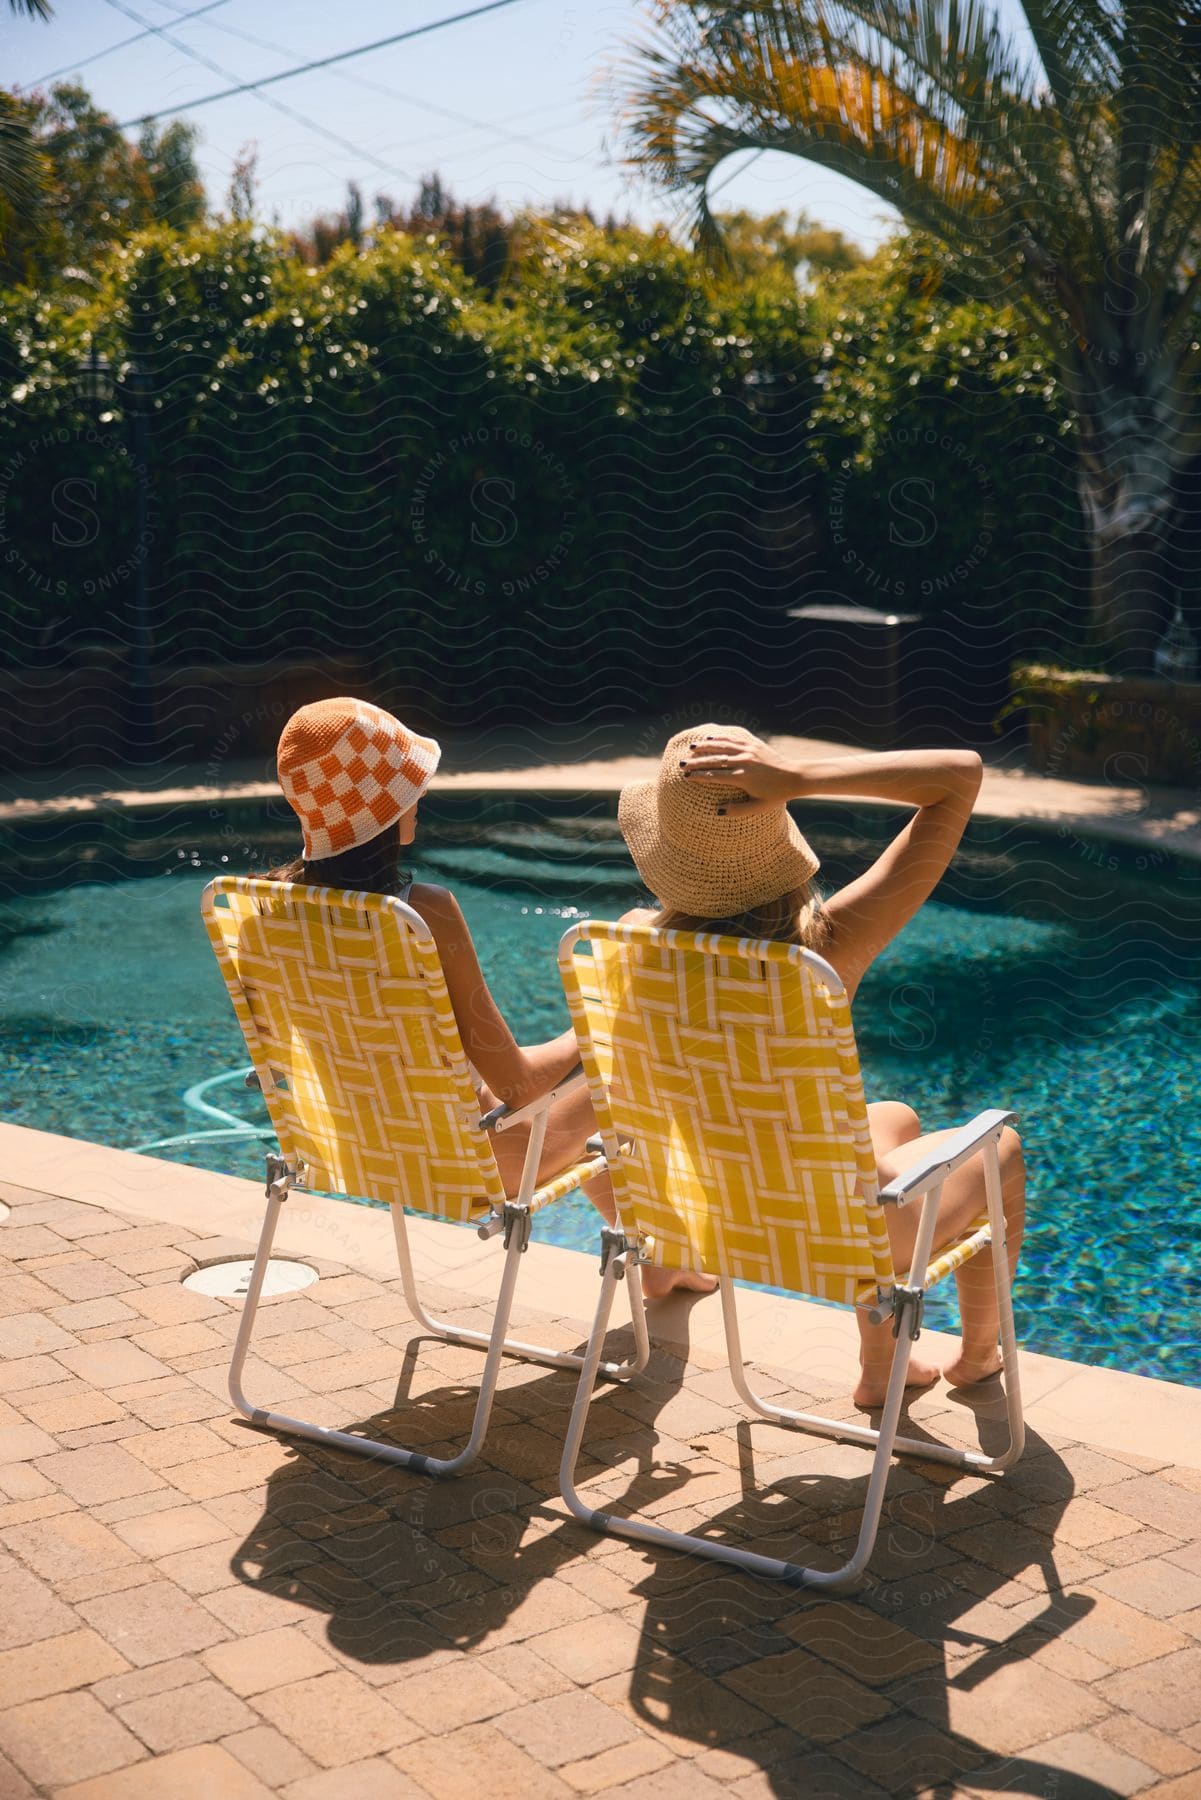 Two women are sitting on beach chairs in front of the pool and both are wearing sun hats.